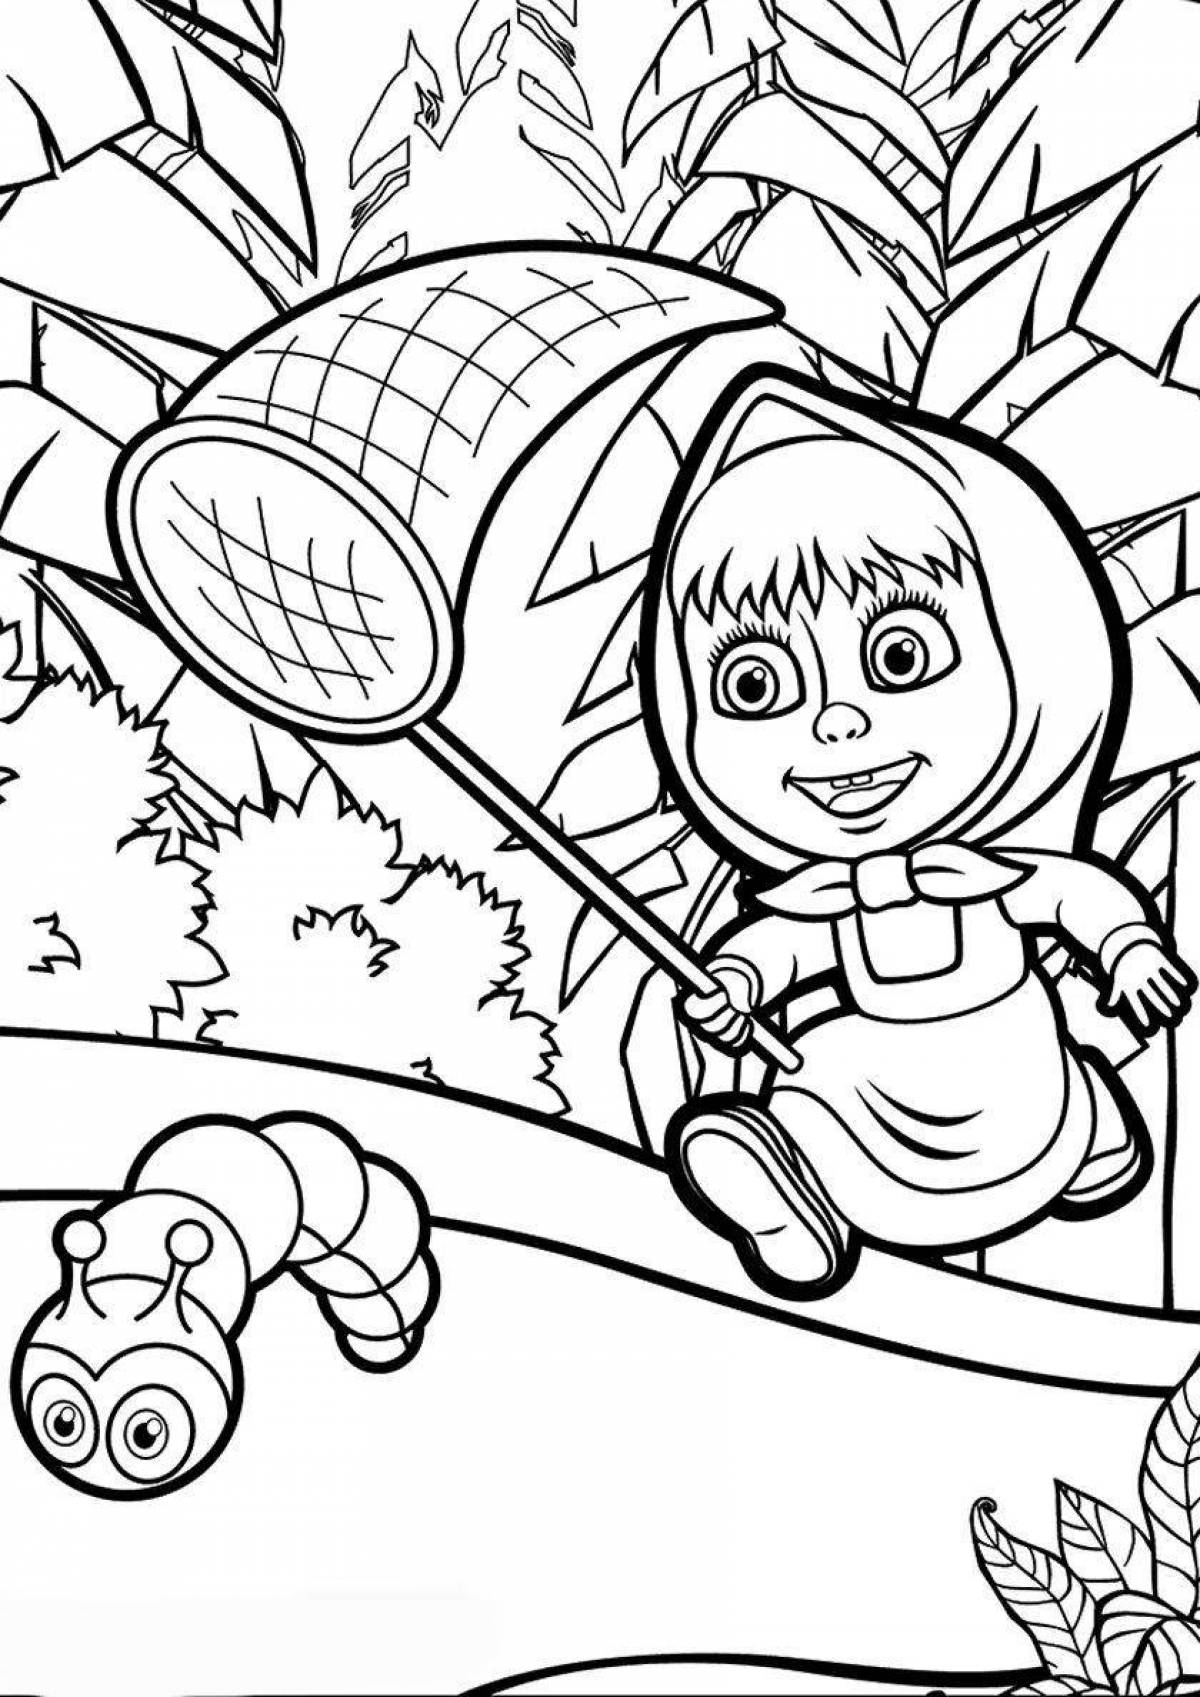 Attractive masha and the bear coloring book